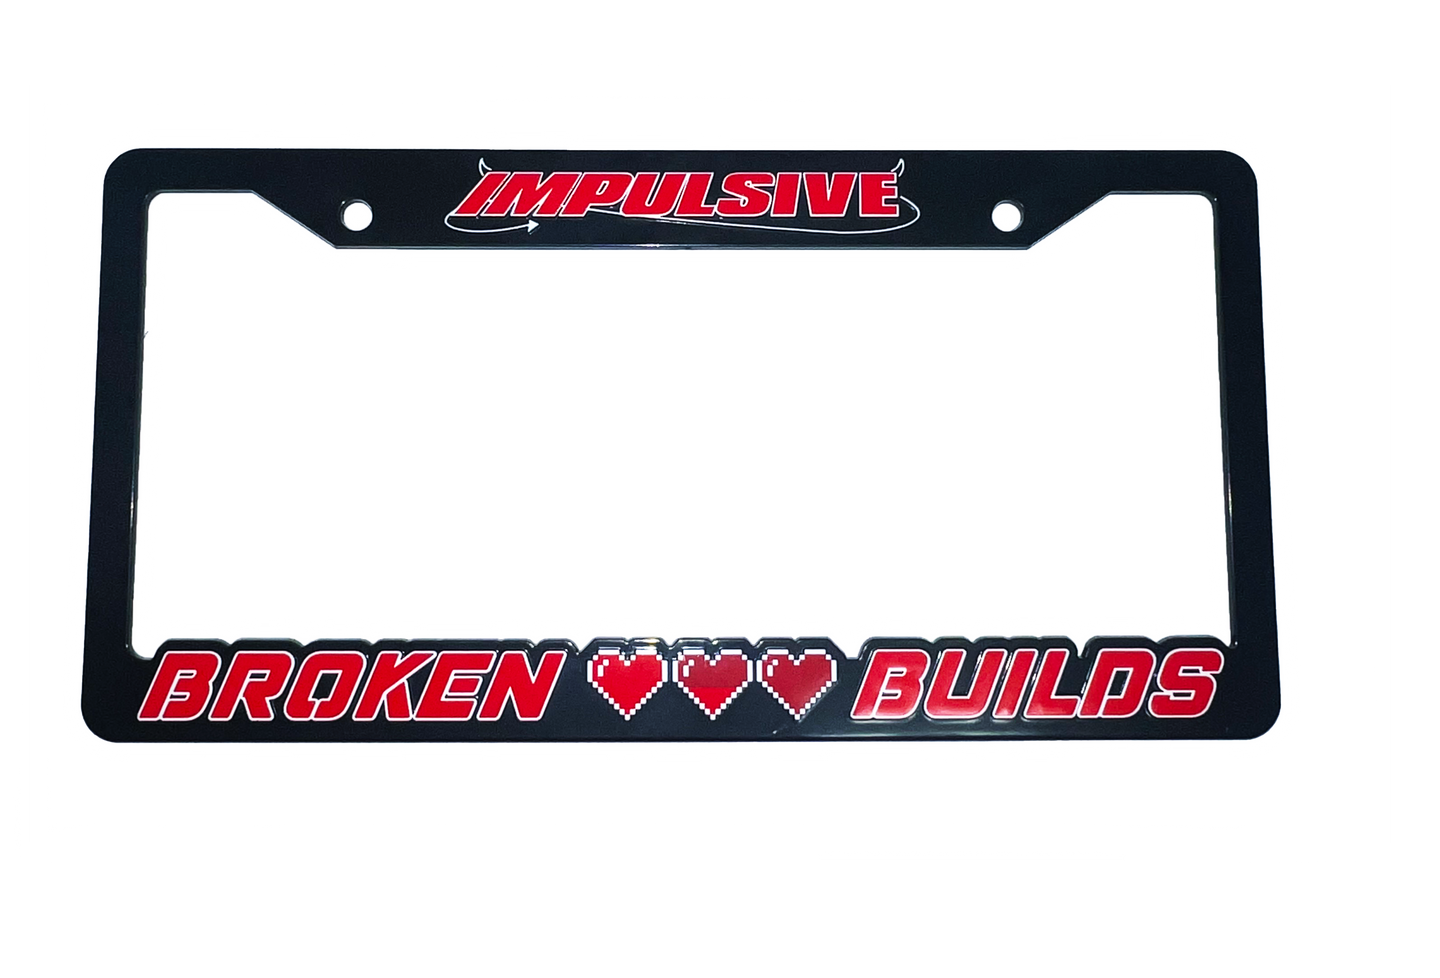 Anime Retro Pixel Arcade Video Game inspired plastic custom License Plate Frame. Top has Impulsive logo and the bottom has words 